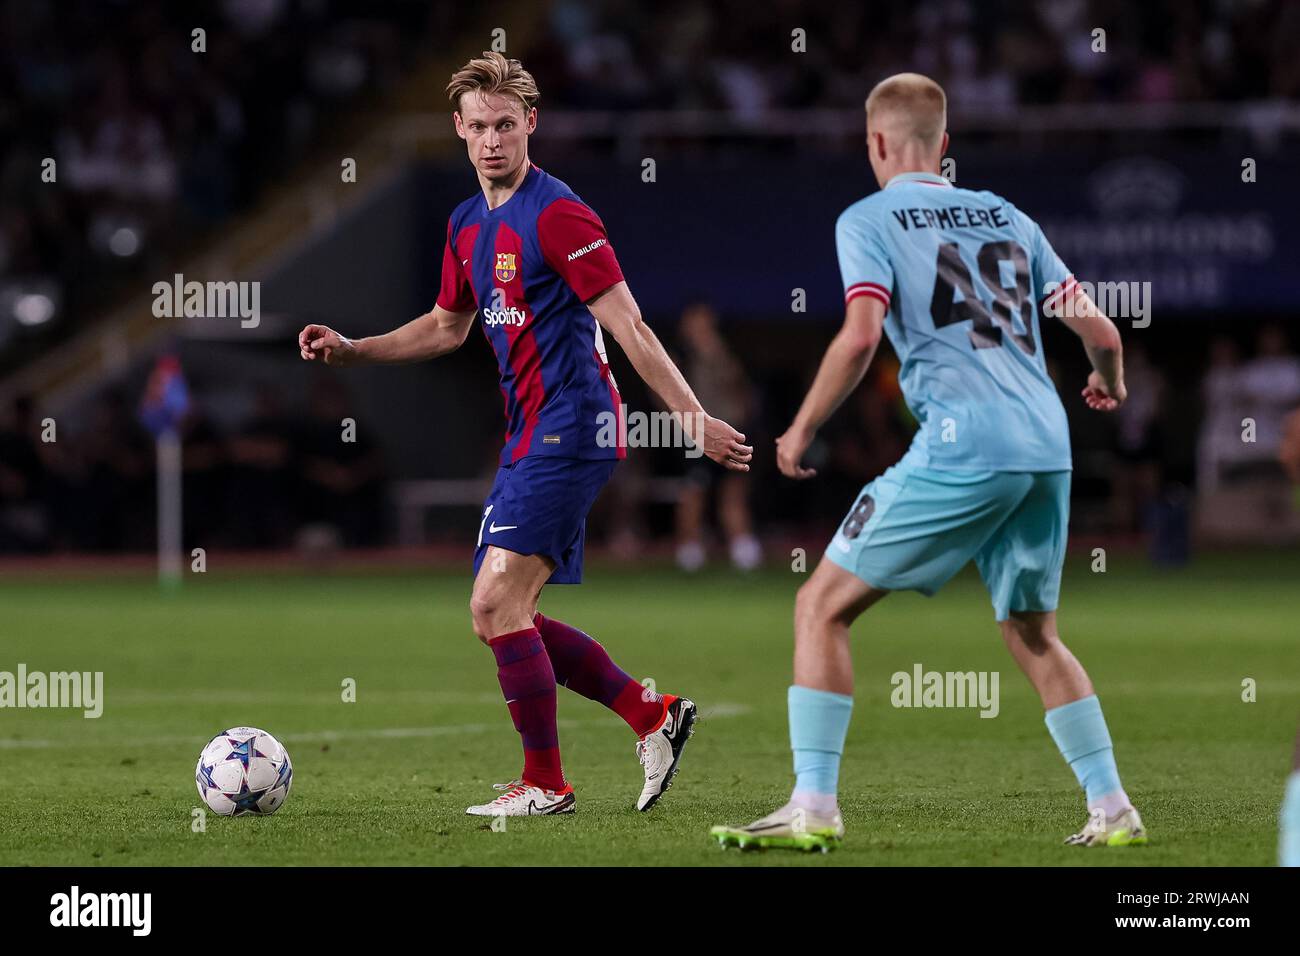 Barcelona, Spain. 19th Sep, 2023. BARCELONA, SPAIN - SEPTEMBER 19: during the UEFA Champions League match between FC Barcelona and Royal Antwerp FC at the Estadi Olimpic Lluis Companys on September 19, 2023 in Barcelona, Spain Credit: DAX Images/Alamy Live News Stock Photo